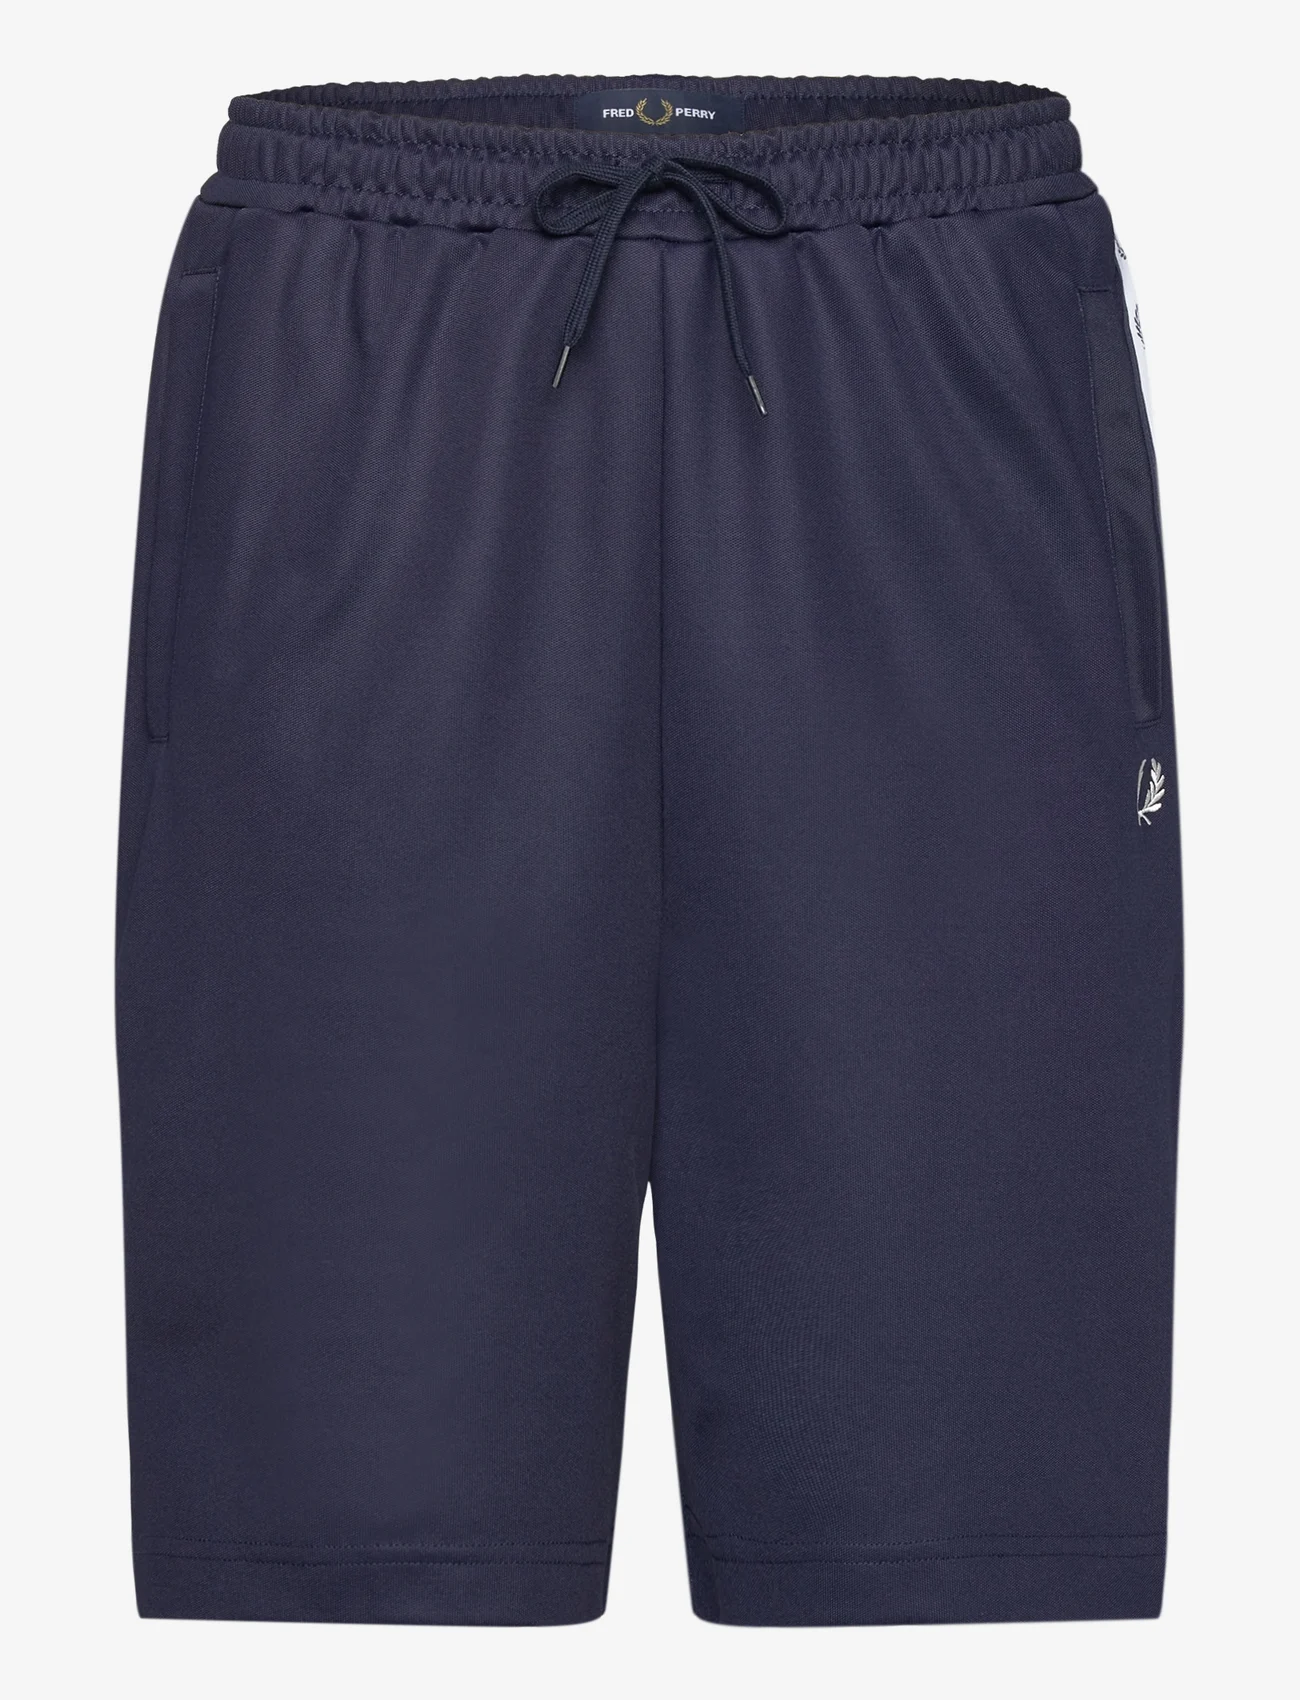 Fred Perry - TAPED TRICOT SHORT - män - carbon blue - 0